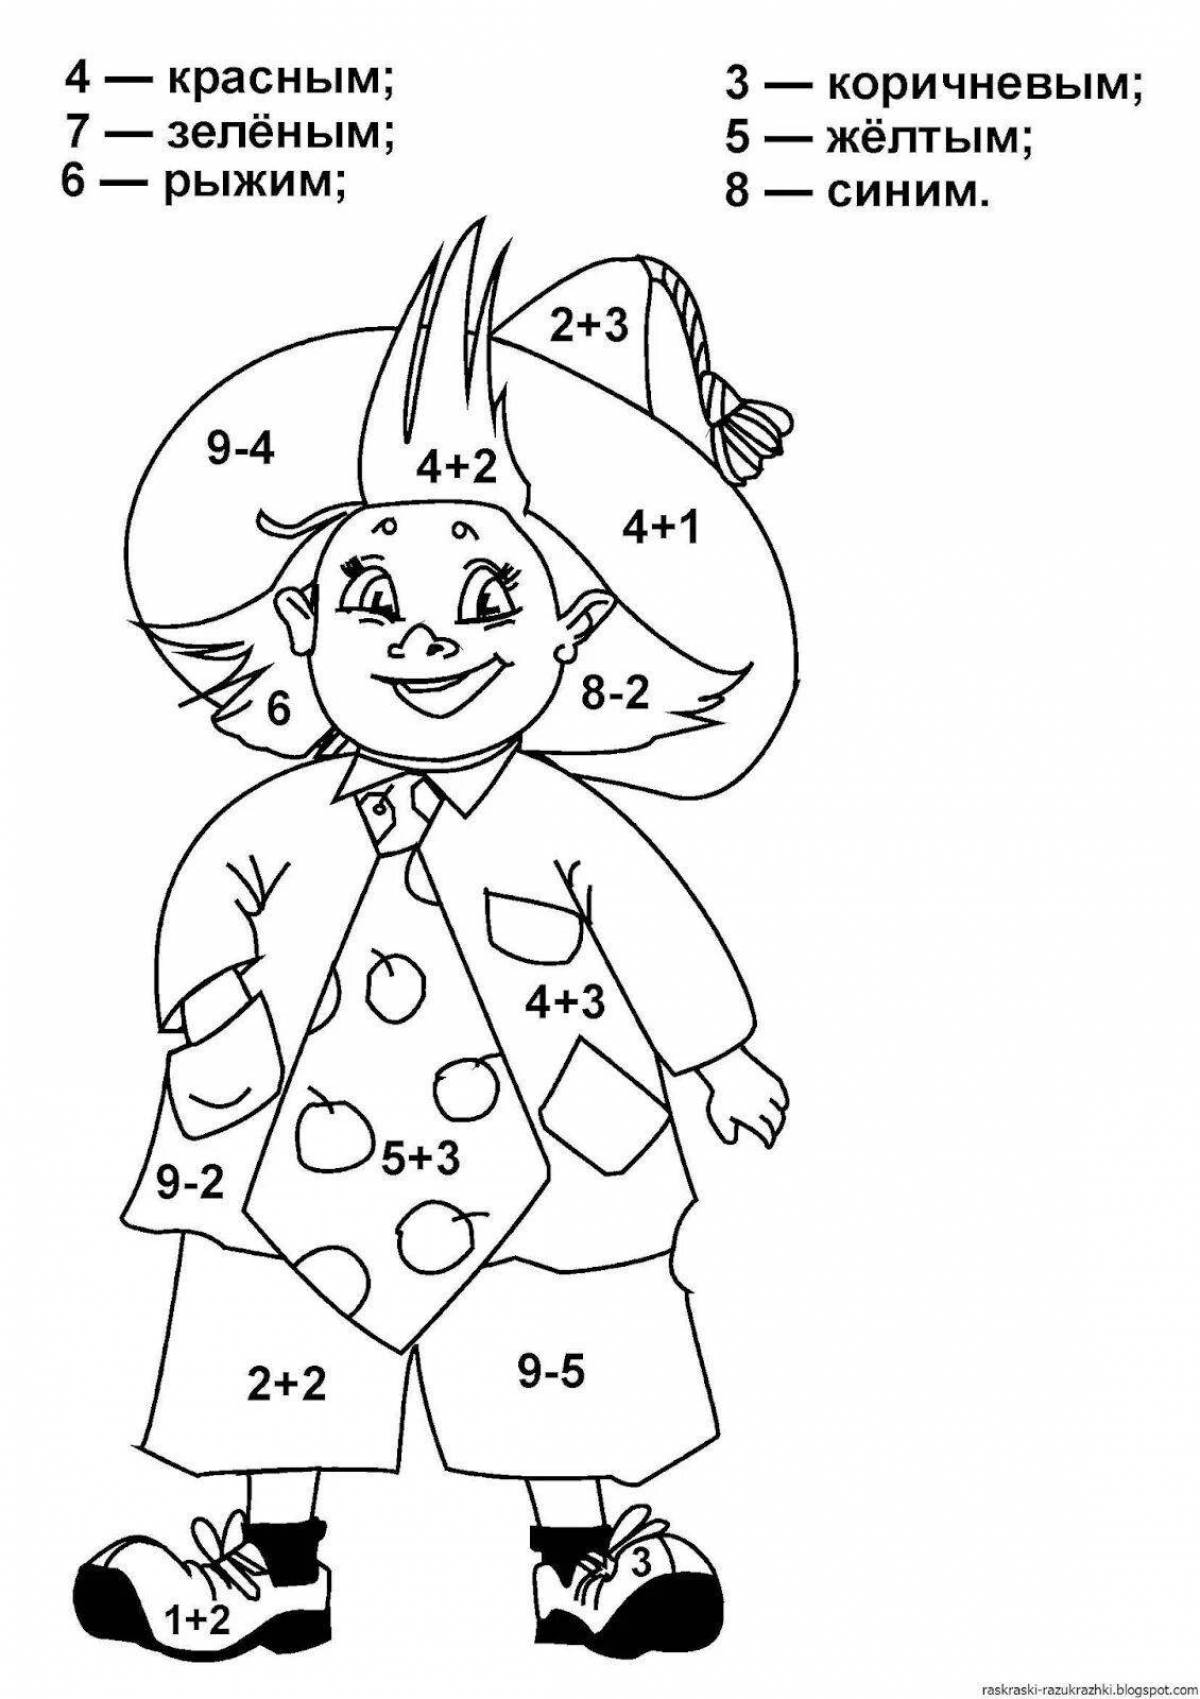 Fun math coloring pages for 6-7 year olds